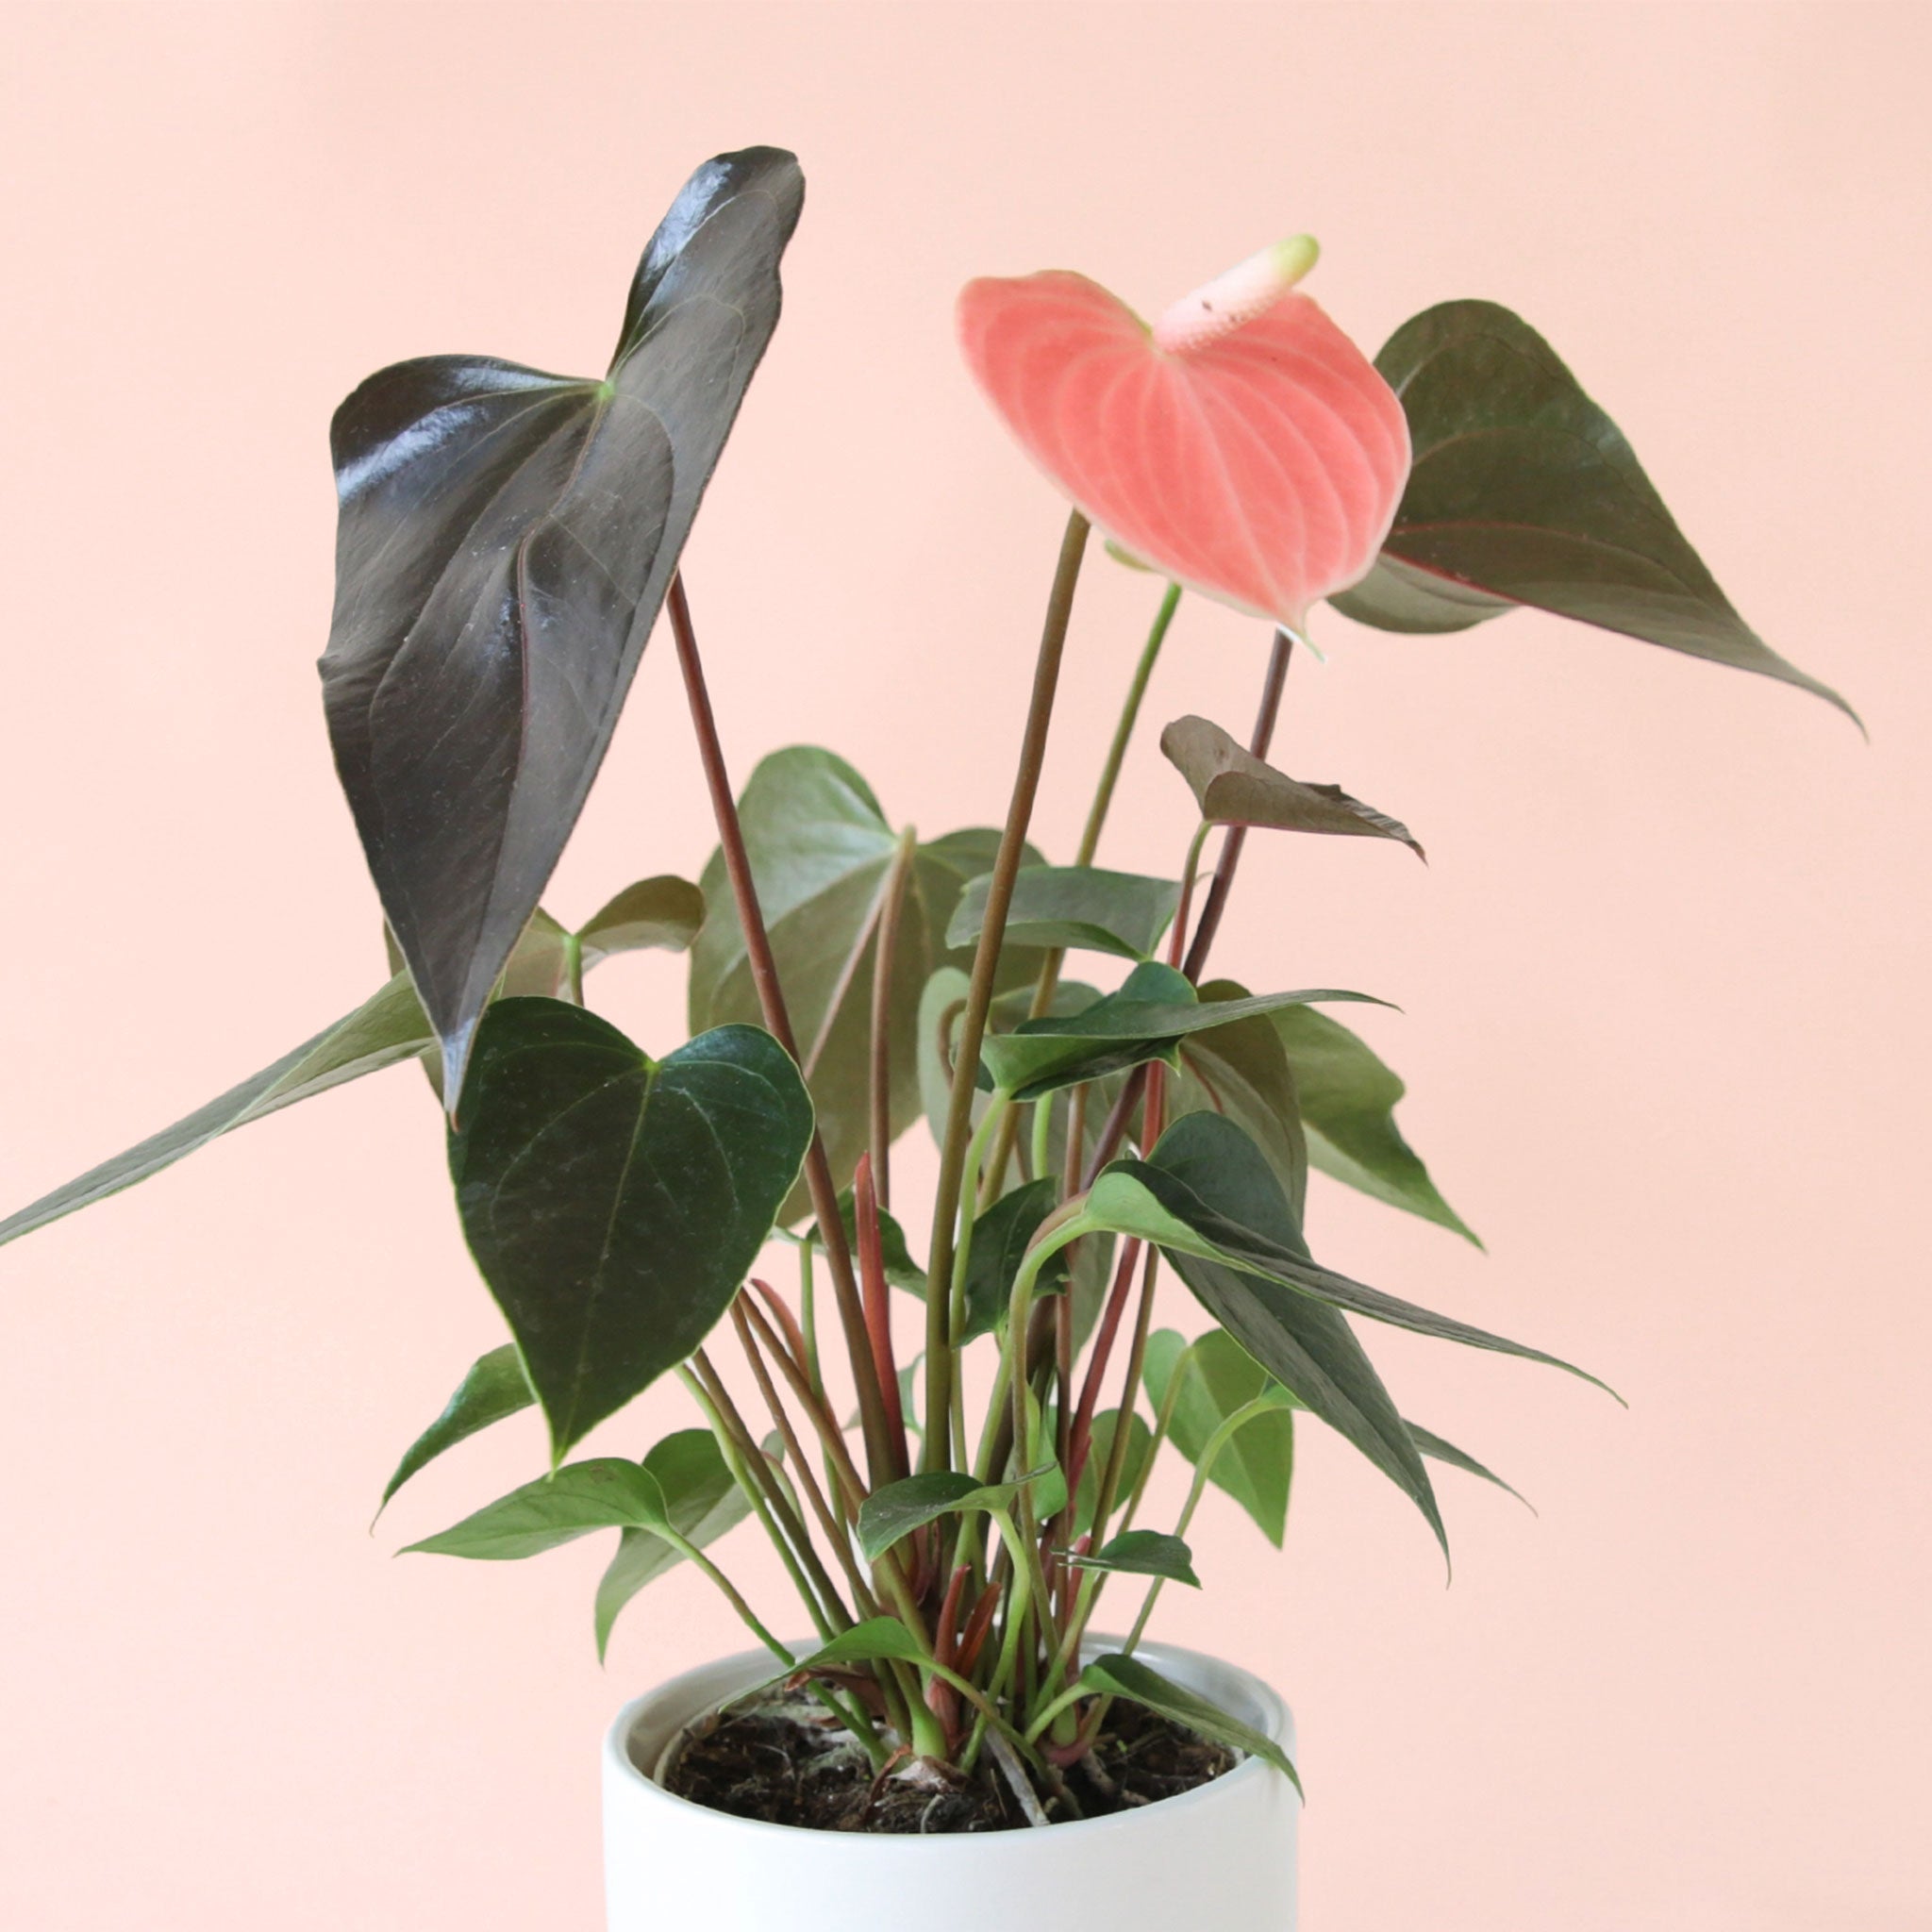 an anthurium rainbow champion with dark green pointed leaves and a salmon pink flower in a white pot